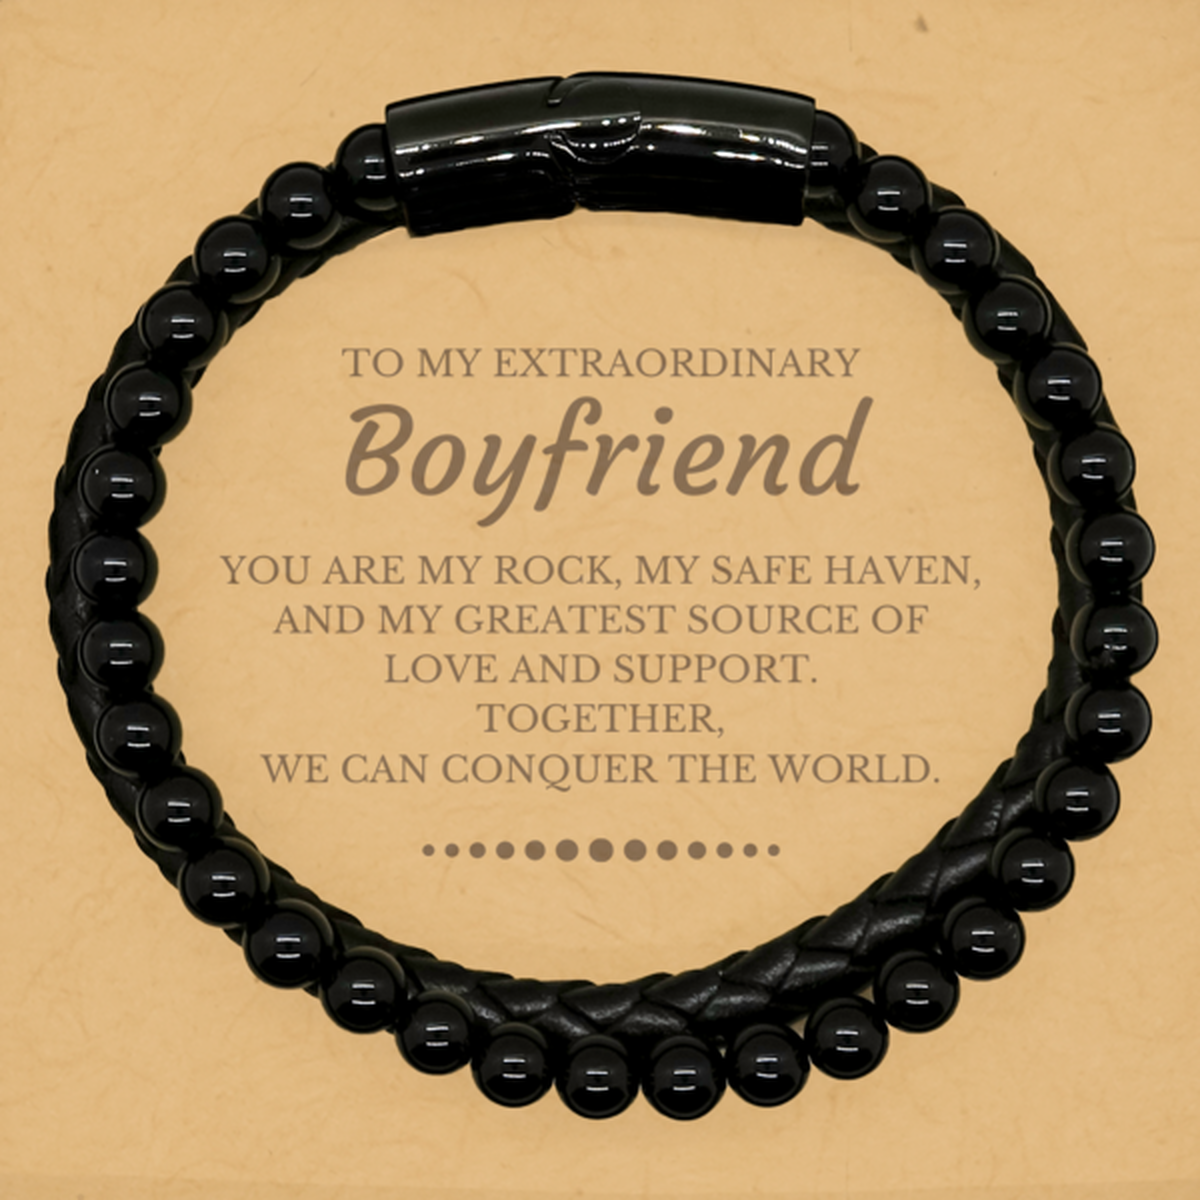 To My Extraordinary Boyfriend Gifts, Together, we can conquer the world, Birthday Stone Leather Bracelets For Boyfriend, Christmas Gifts For Boyfriend